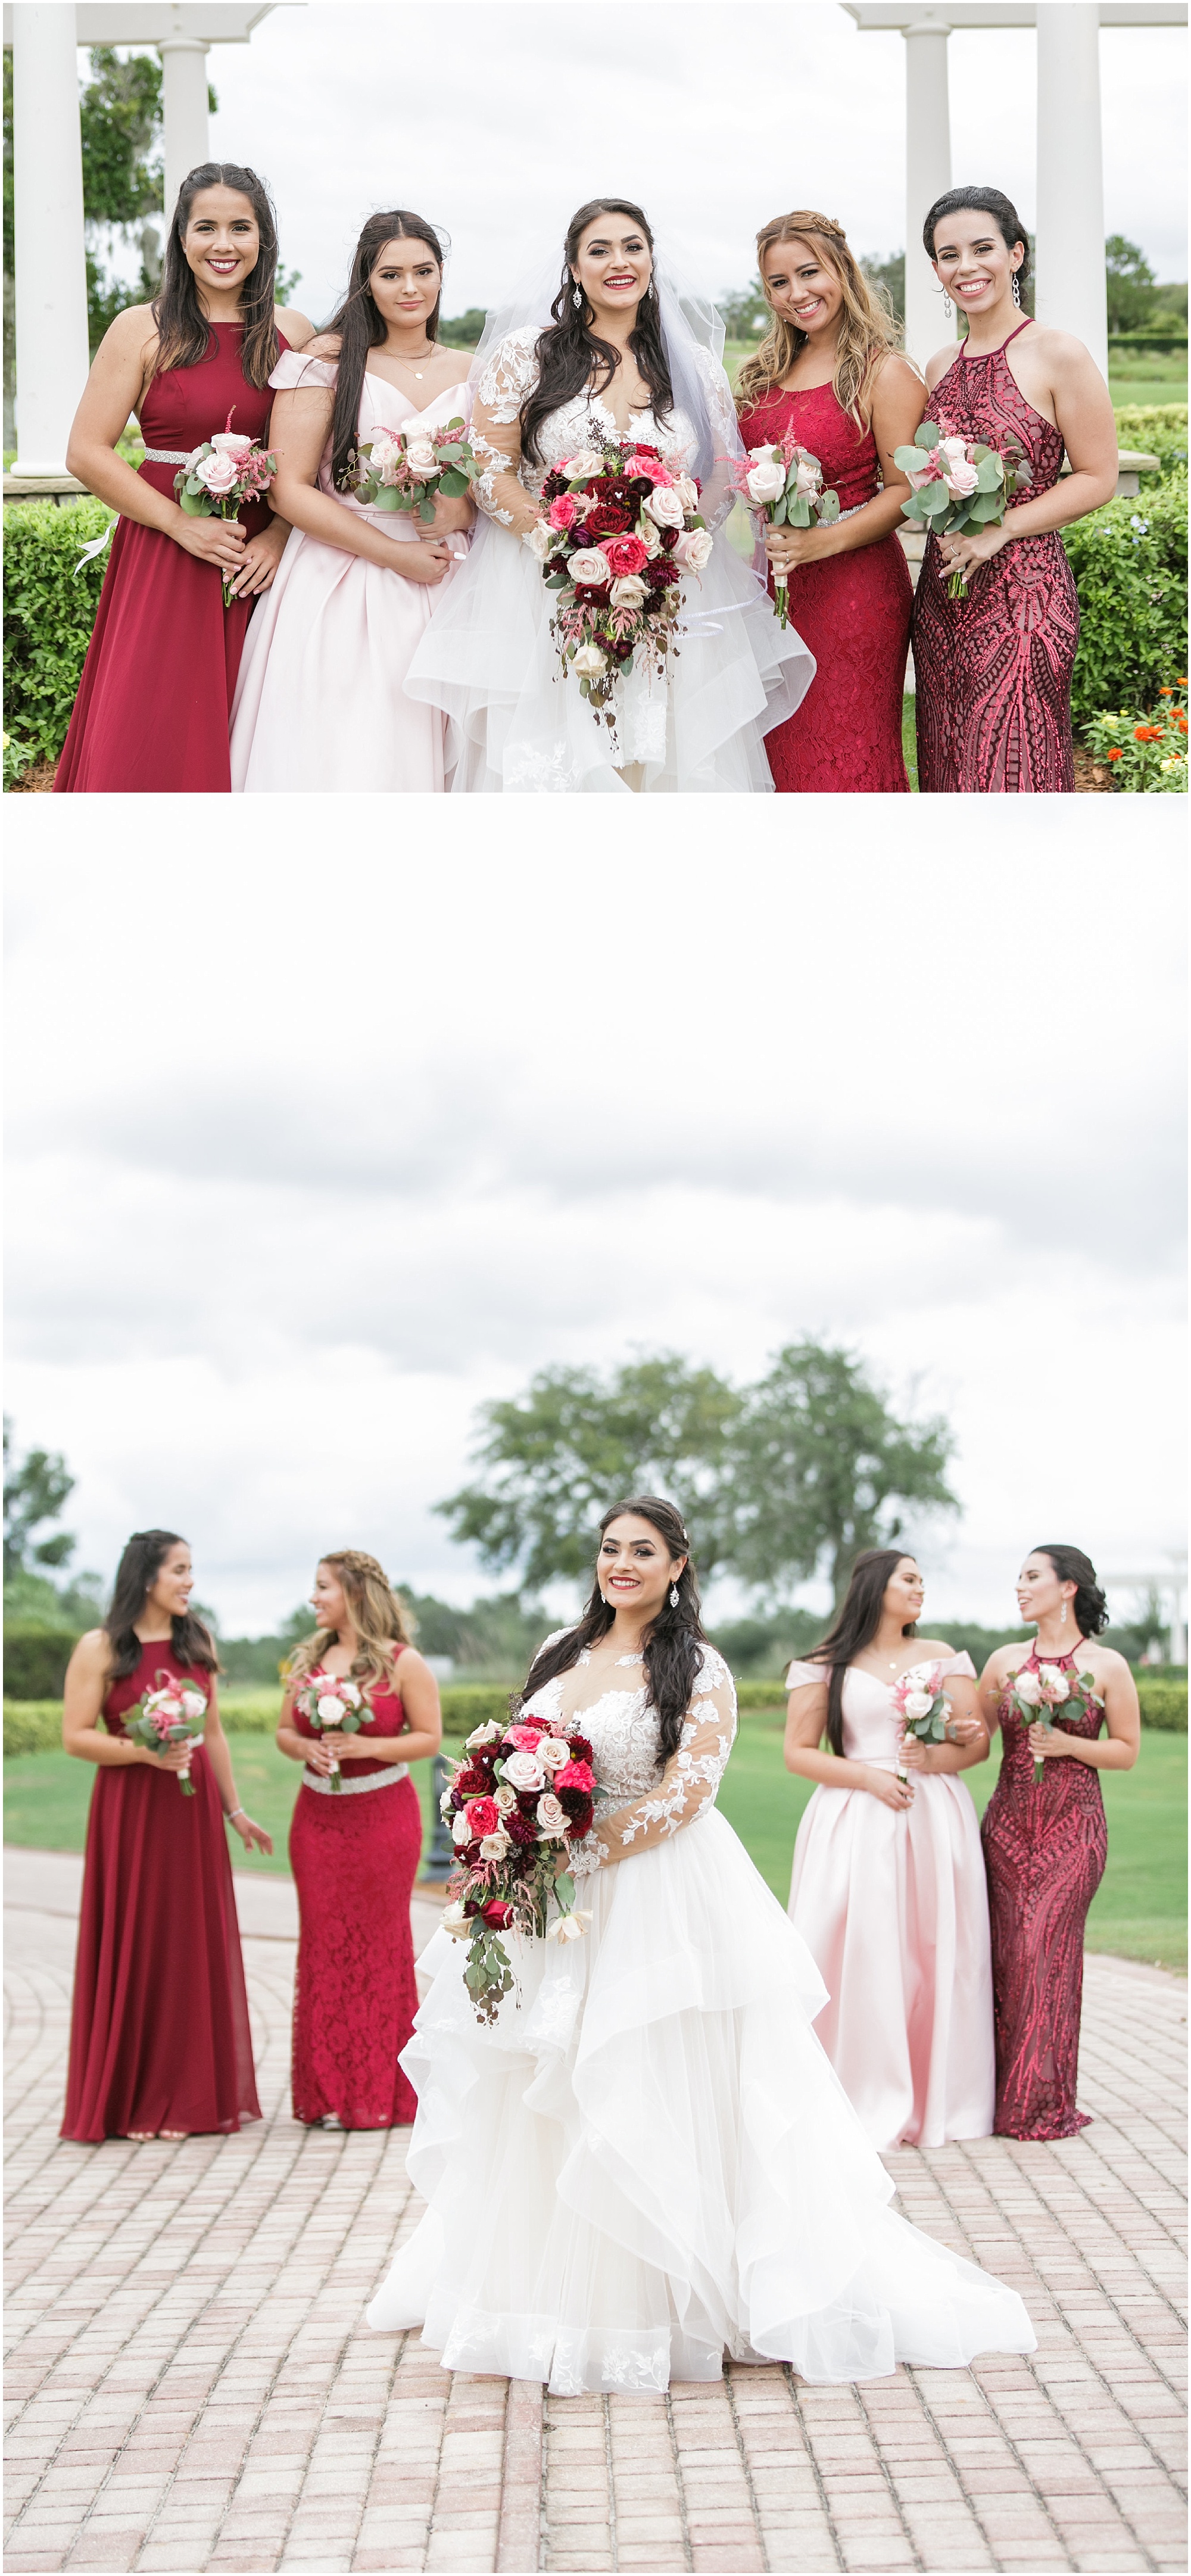 Photos of the bridal party in their mismatched bridesmaids dresses. 